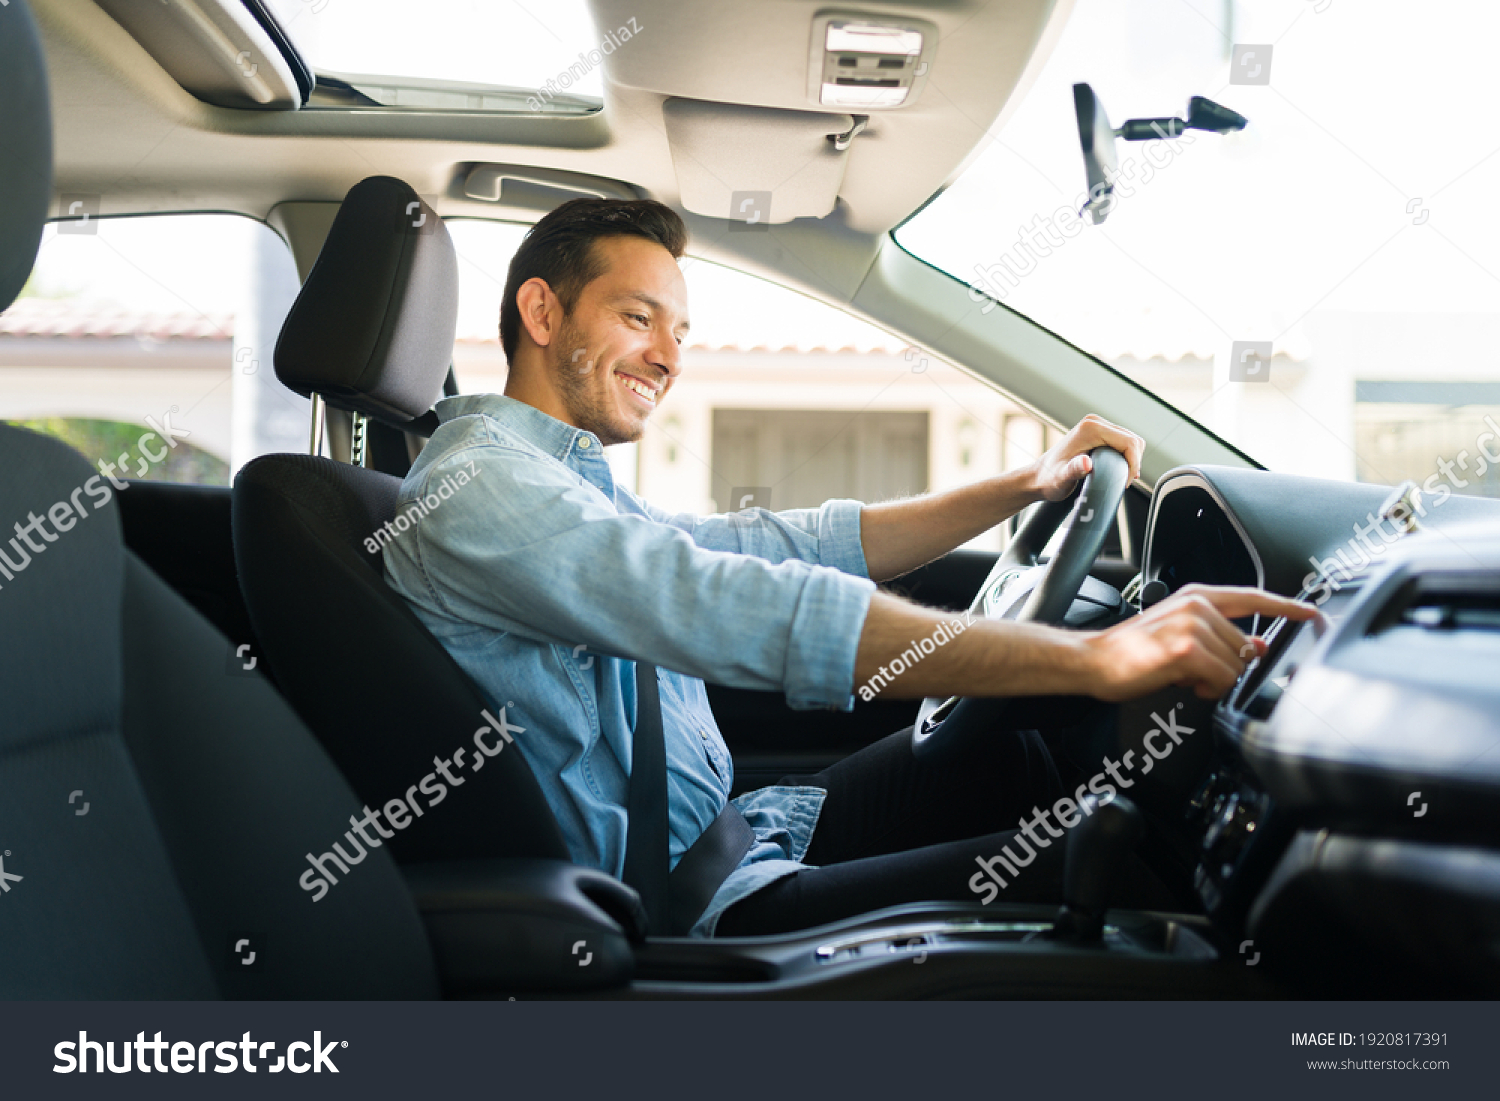 Handsome man in his 30s sitting in the driver's seat and smiling. Taxi driver listening to music on the car and changing the radio station #1920817391